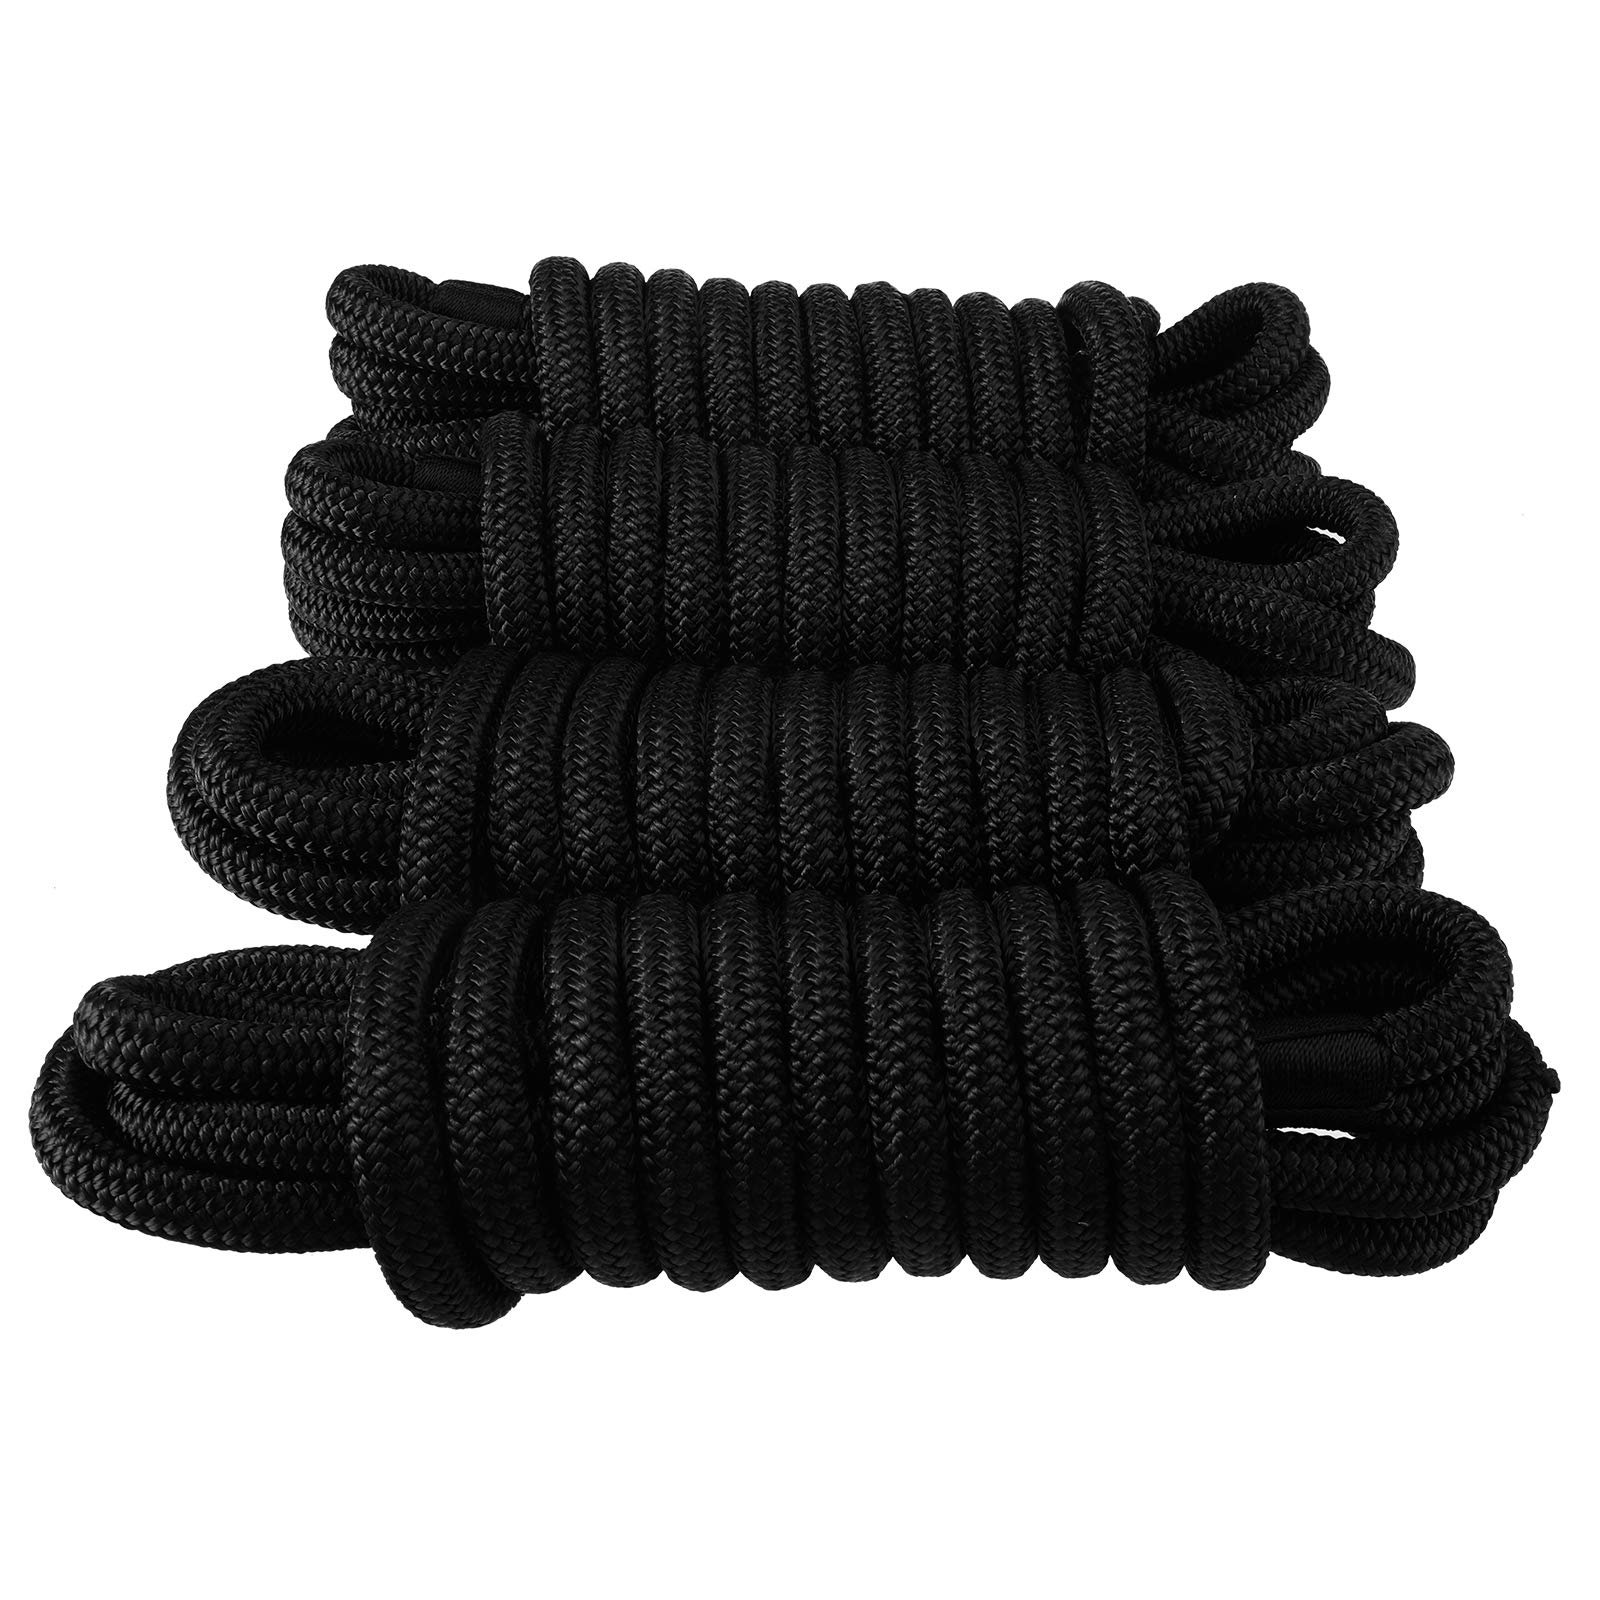 5/8 x 15' - Black (2 Pack) Durable Double Braided Nylon Dock Line - for Boats Up to 45' - Long Lasting Mooring Line - Strong Nylon Dock Lines for